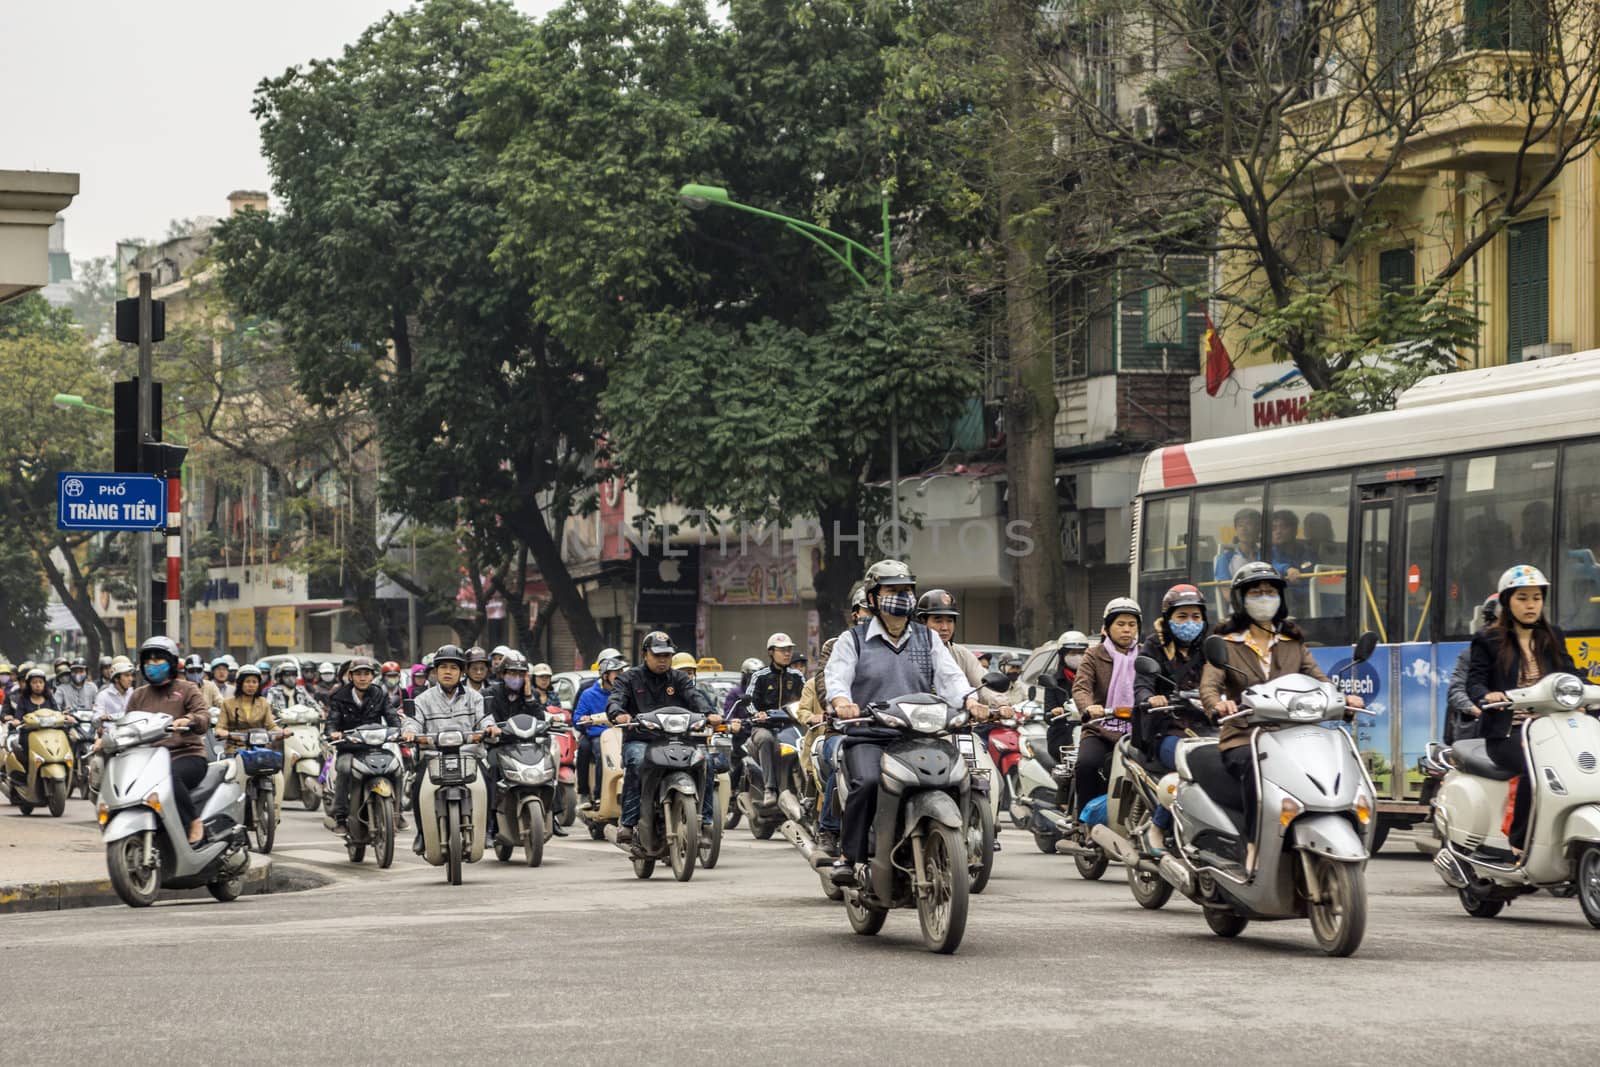 Swarms of motorcycles and scooters ride constantly.